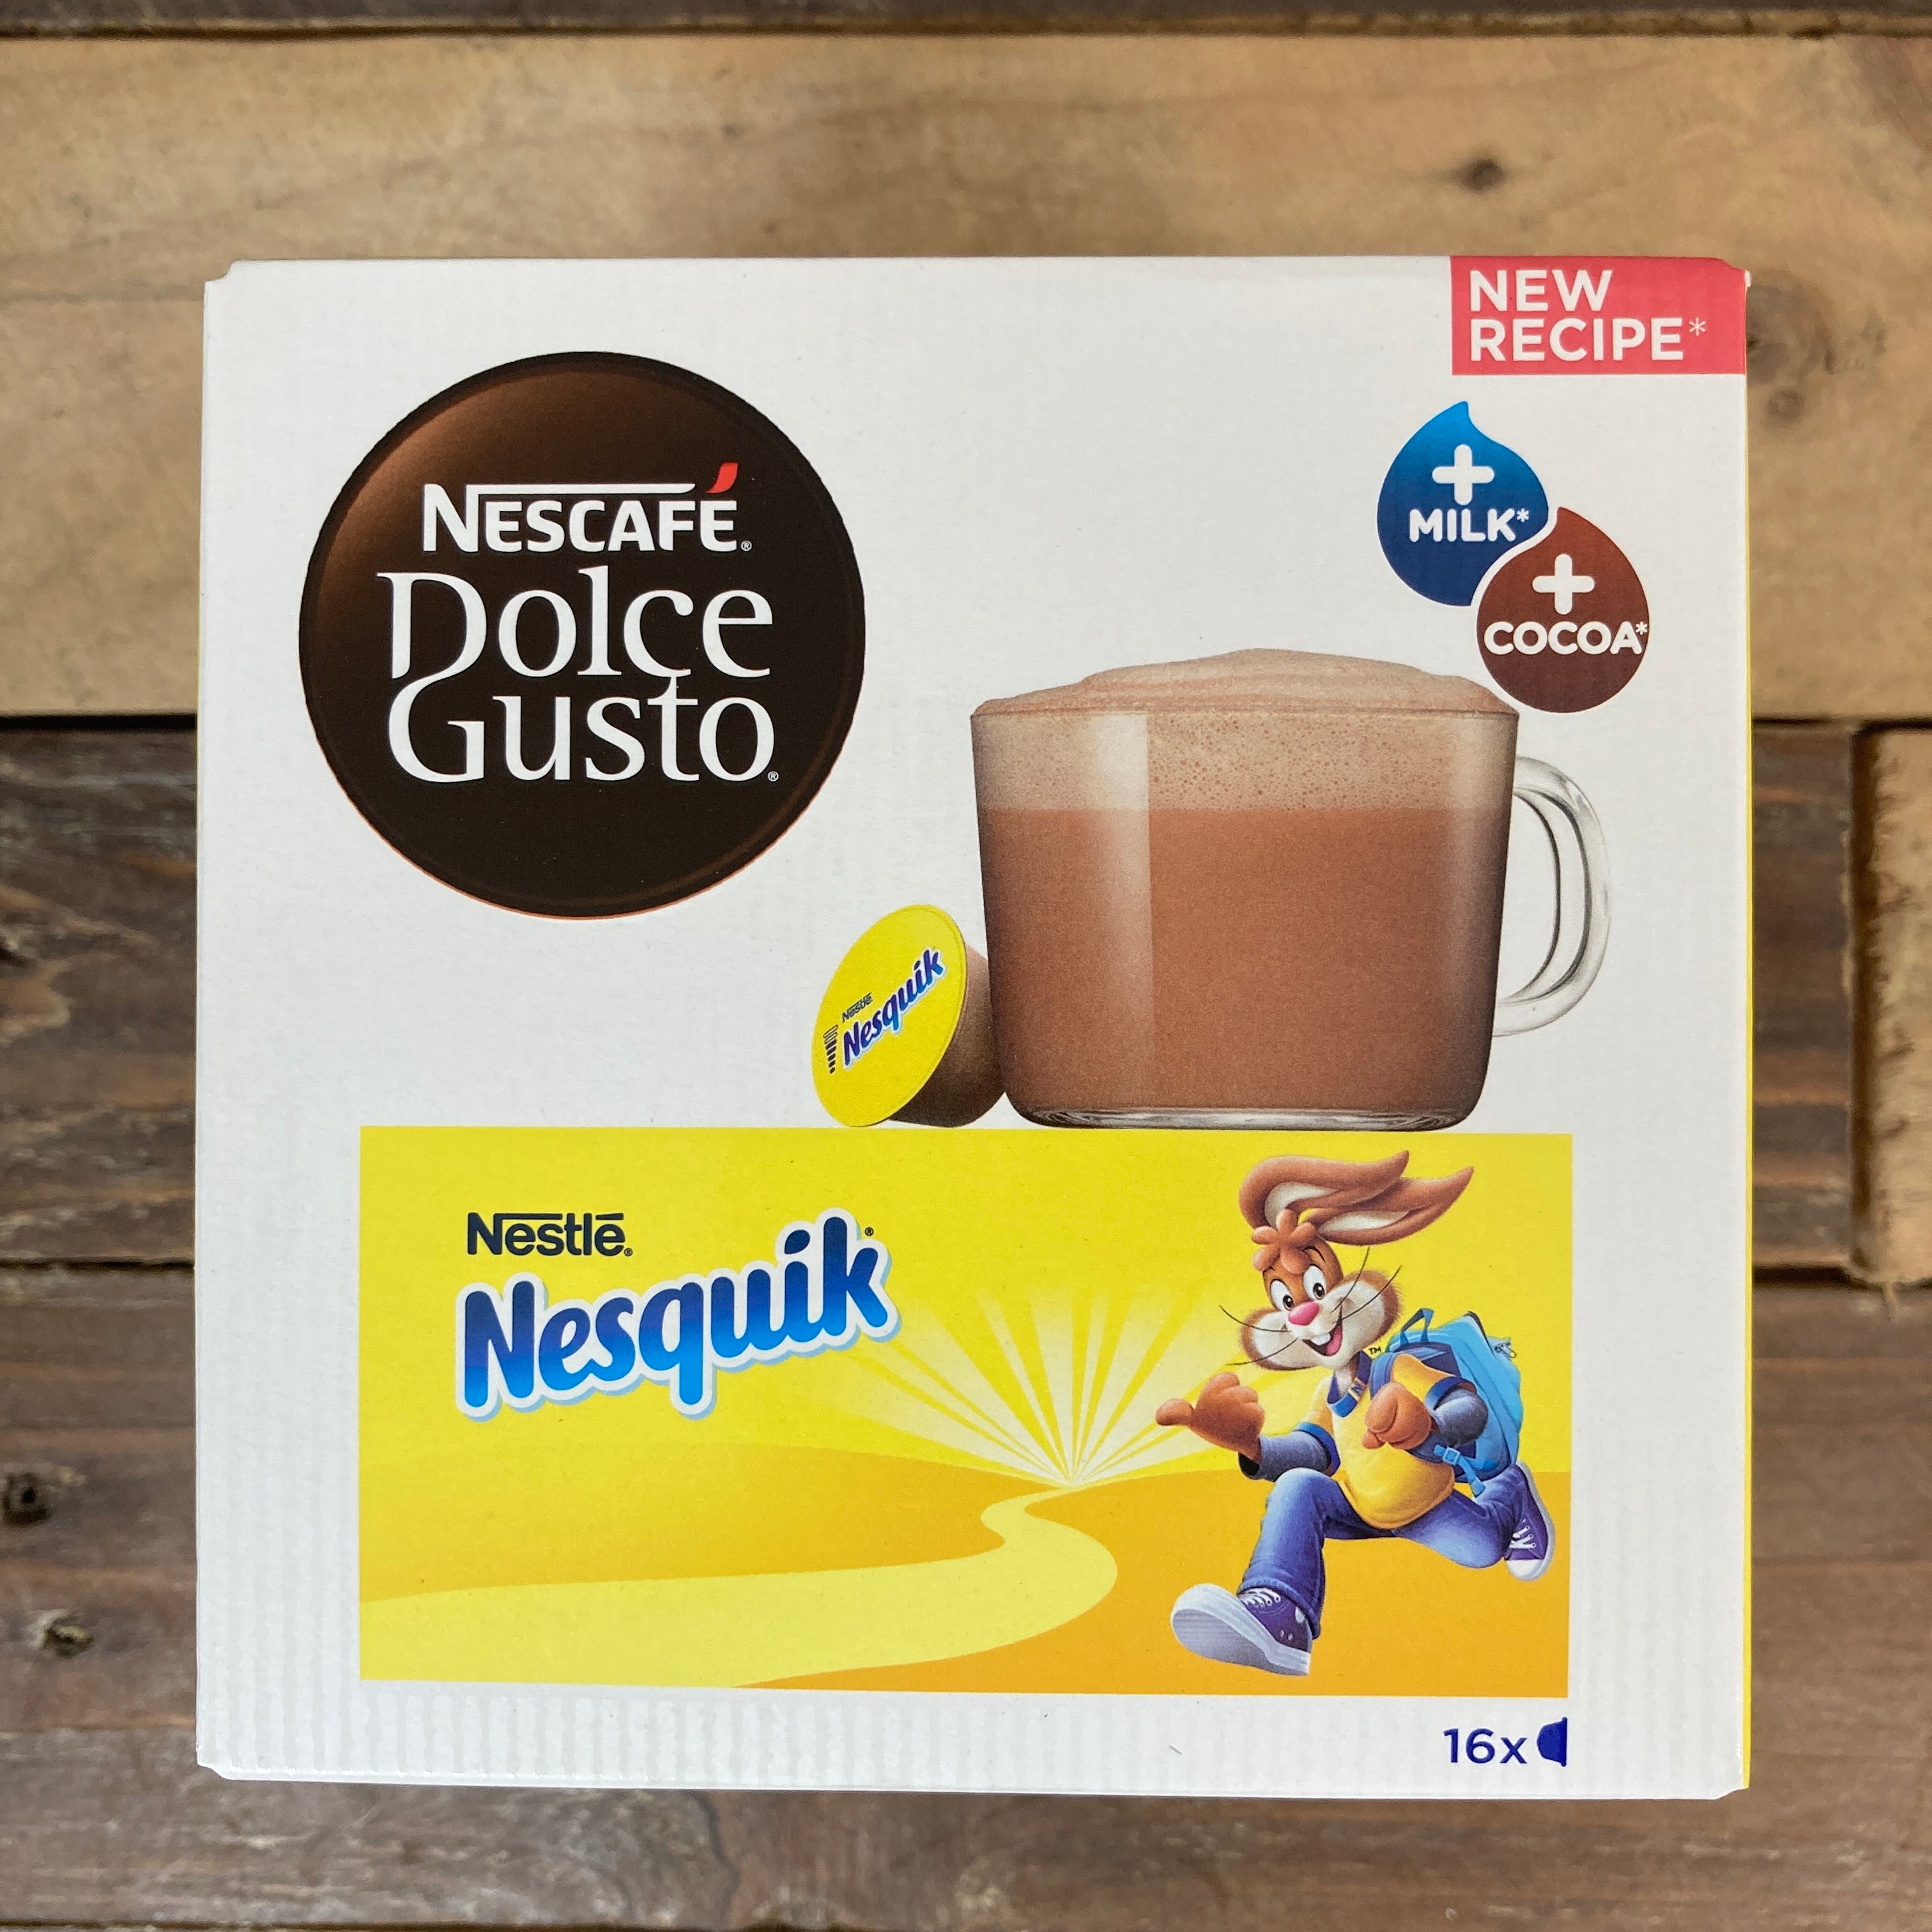 32x Nescafe Dolce Gusto Nesquik Hot Chocolate Pods (2 Packs of 16 Pods